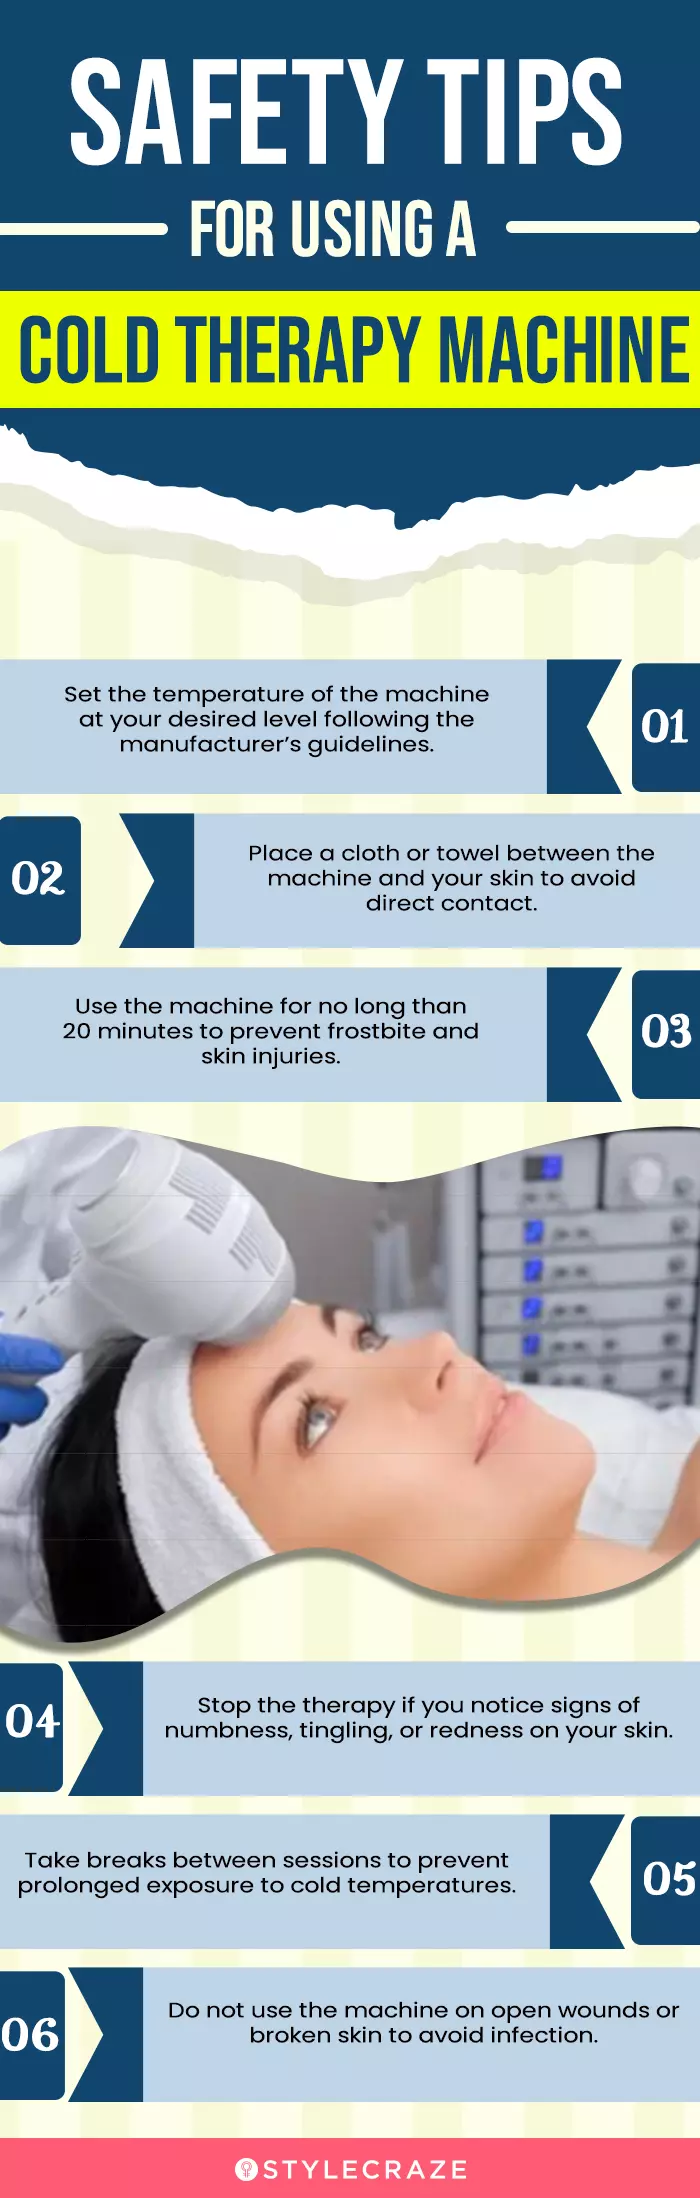 Safety Tips For Using A Cold Therapy Machine (infographic)